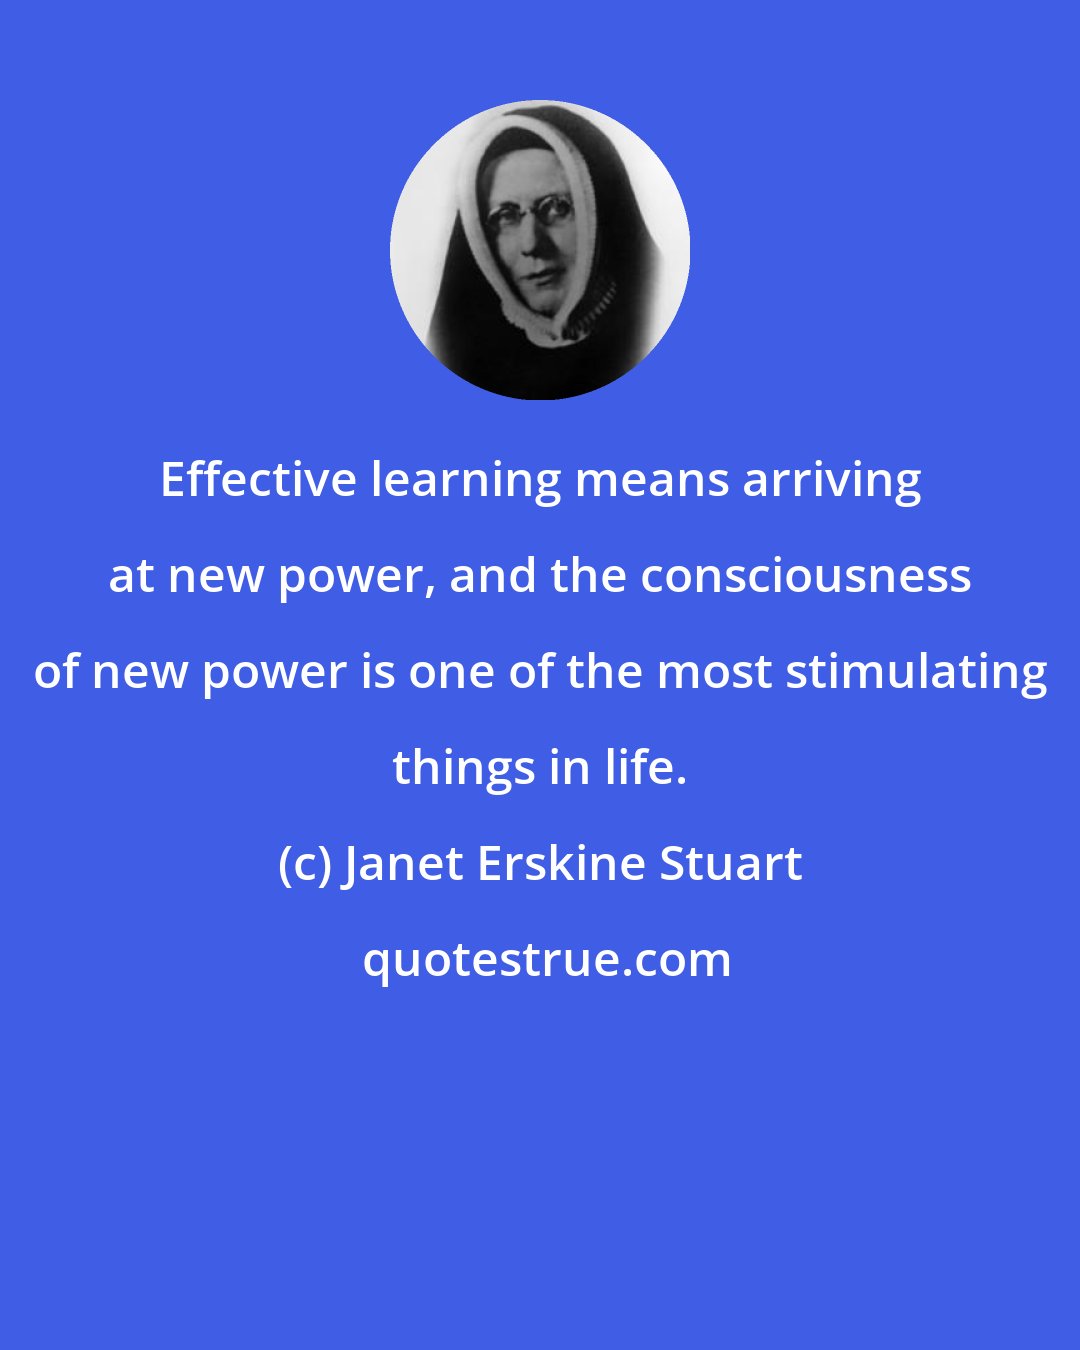 Janet Erskine Stuart: Effective learning means arriving at new power, and the consciousness of new power is one of the most stimulating things in life.